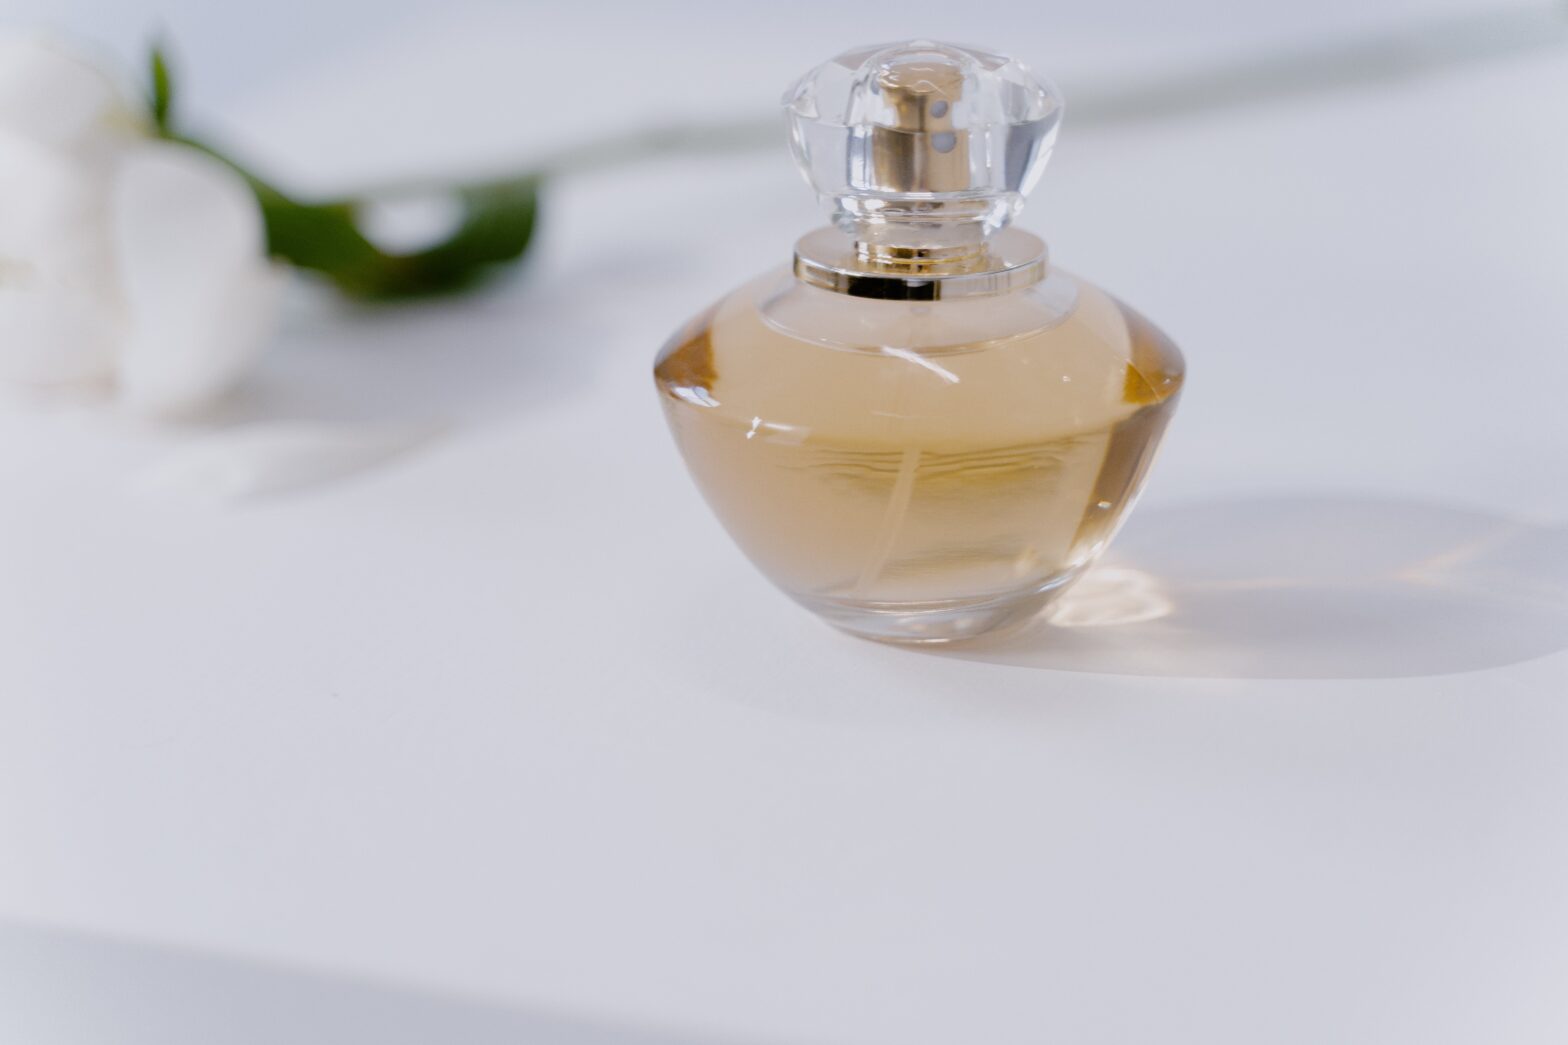 clear-glass-perfume-bottle-on-the-table